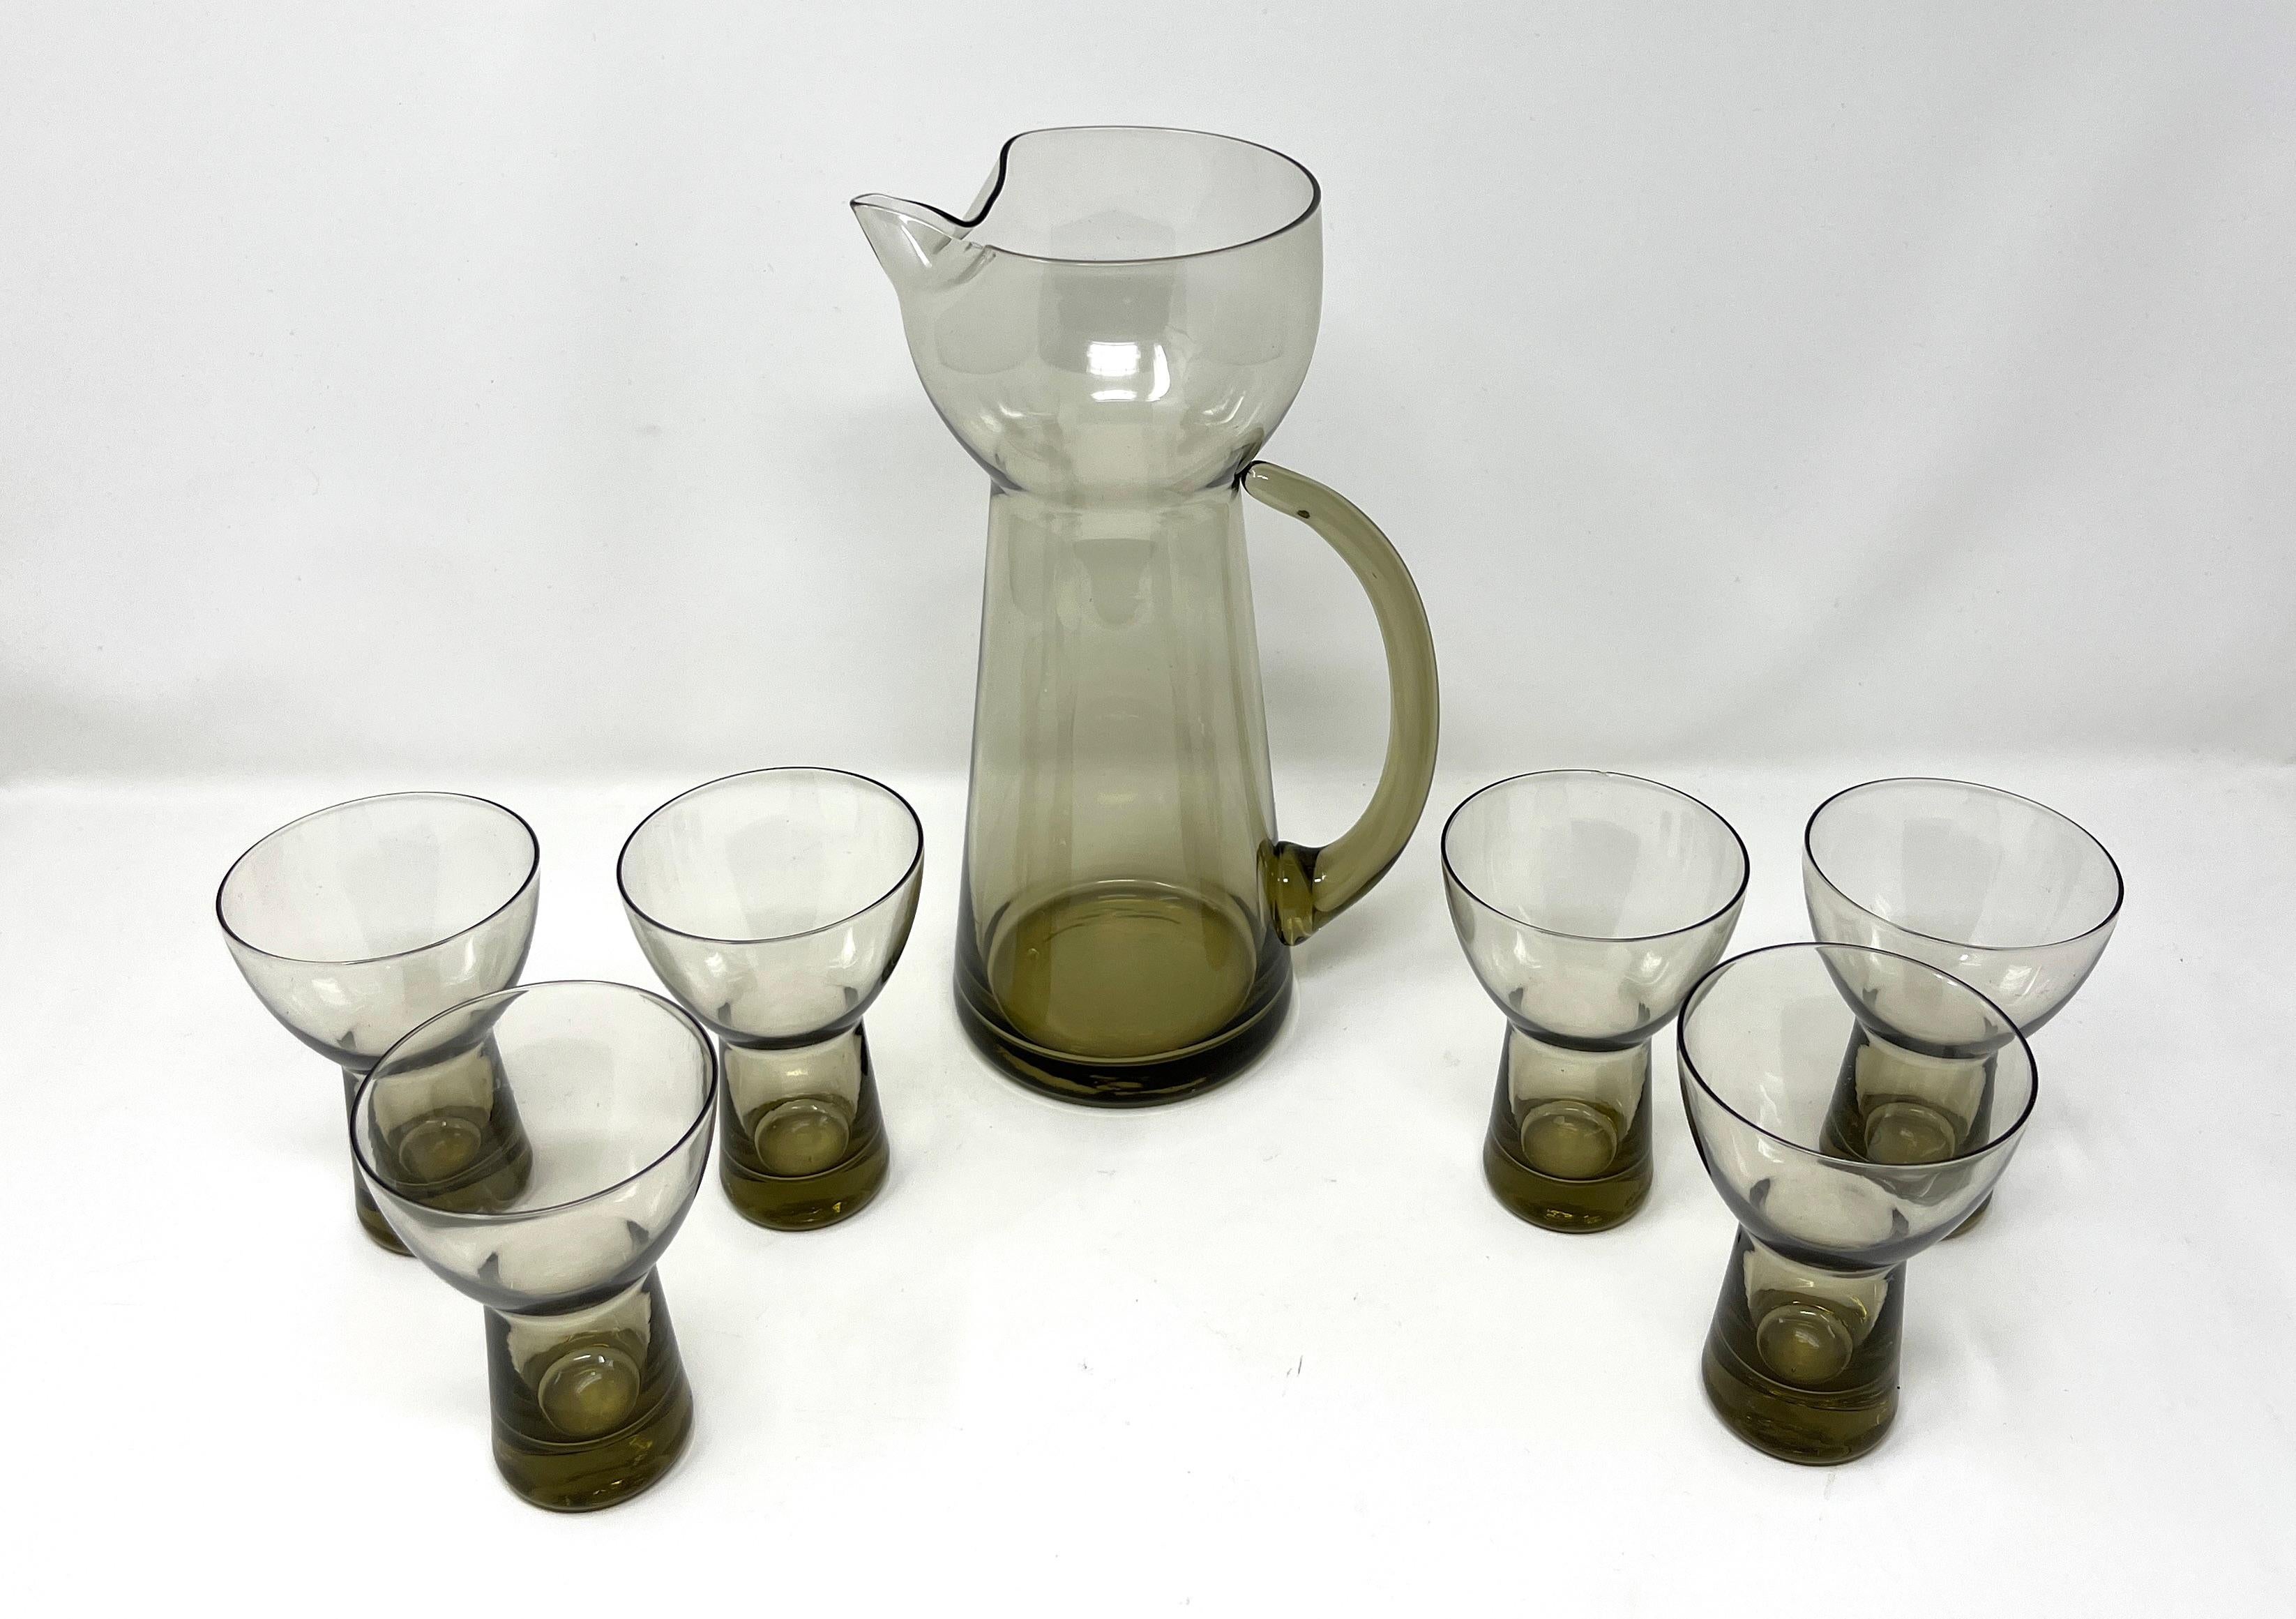 Handled Danish Modern glass handled cocktail pitcher and set of six (6) matching stunning smoke gray-brown aperitif glasses. There are no markings, but they are   handblown, and possibly by Holmegaard. Really gorgeous, sleek and artistic.